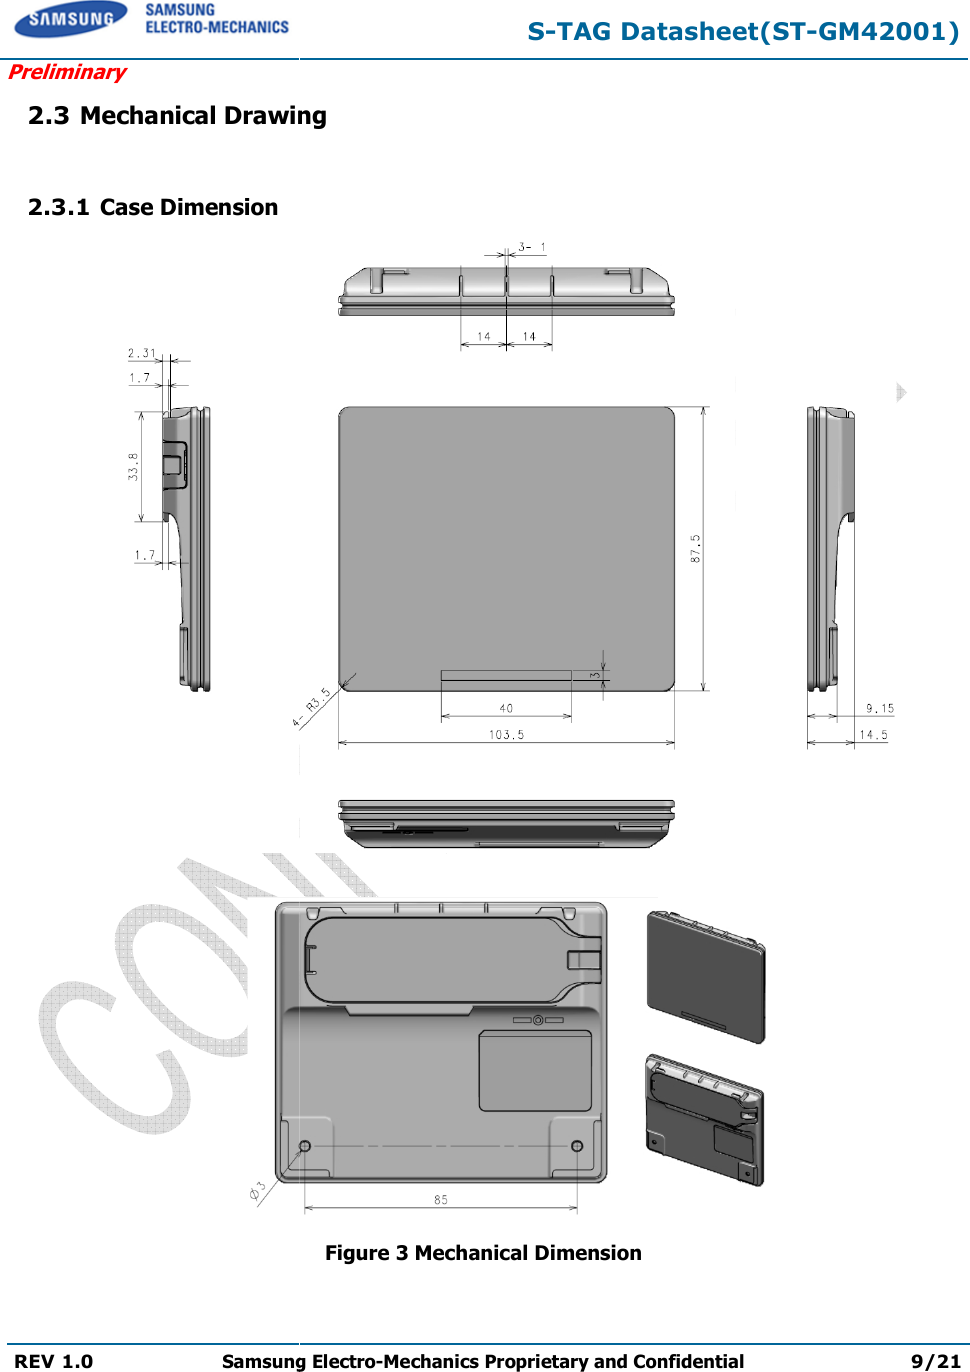  Preliminary REV 1.0 Samsung Electro  2.3 Mechanical Drawing 2.3.1 Case Dimension  S-TAG Datasheet(STSamsung Electro-Mechanics Proprietary and ConfidentialMechanical Drawing  Figure 3 Mechanical Dimension  TAG Datasheet(ST-GM42001) Proprietary and Confidential 9/21   